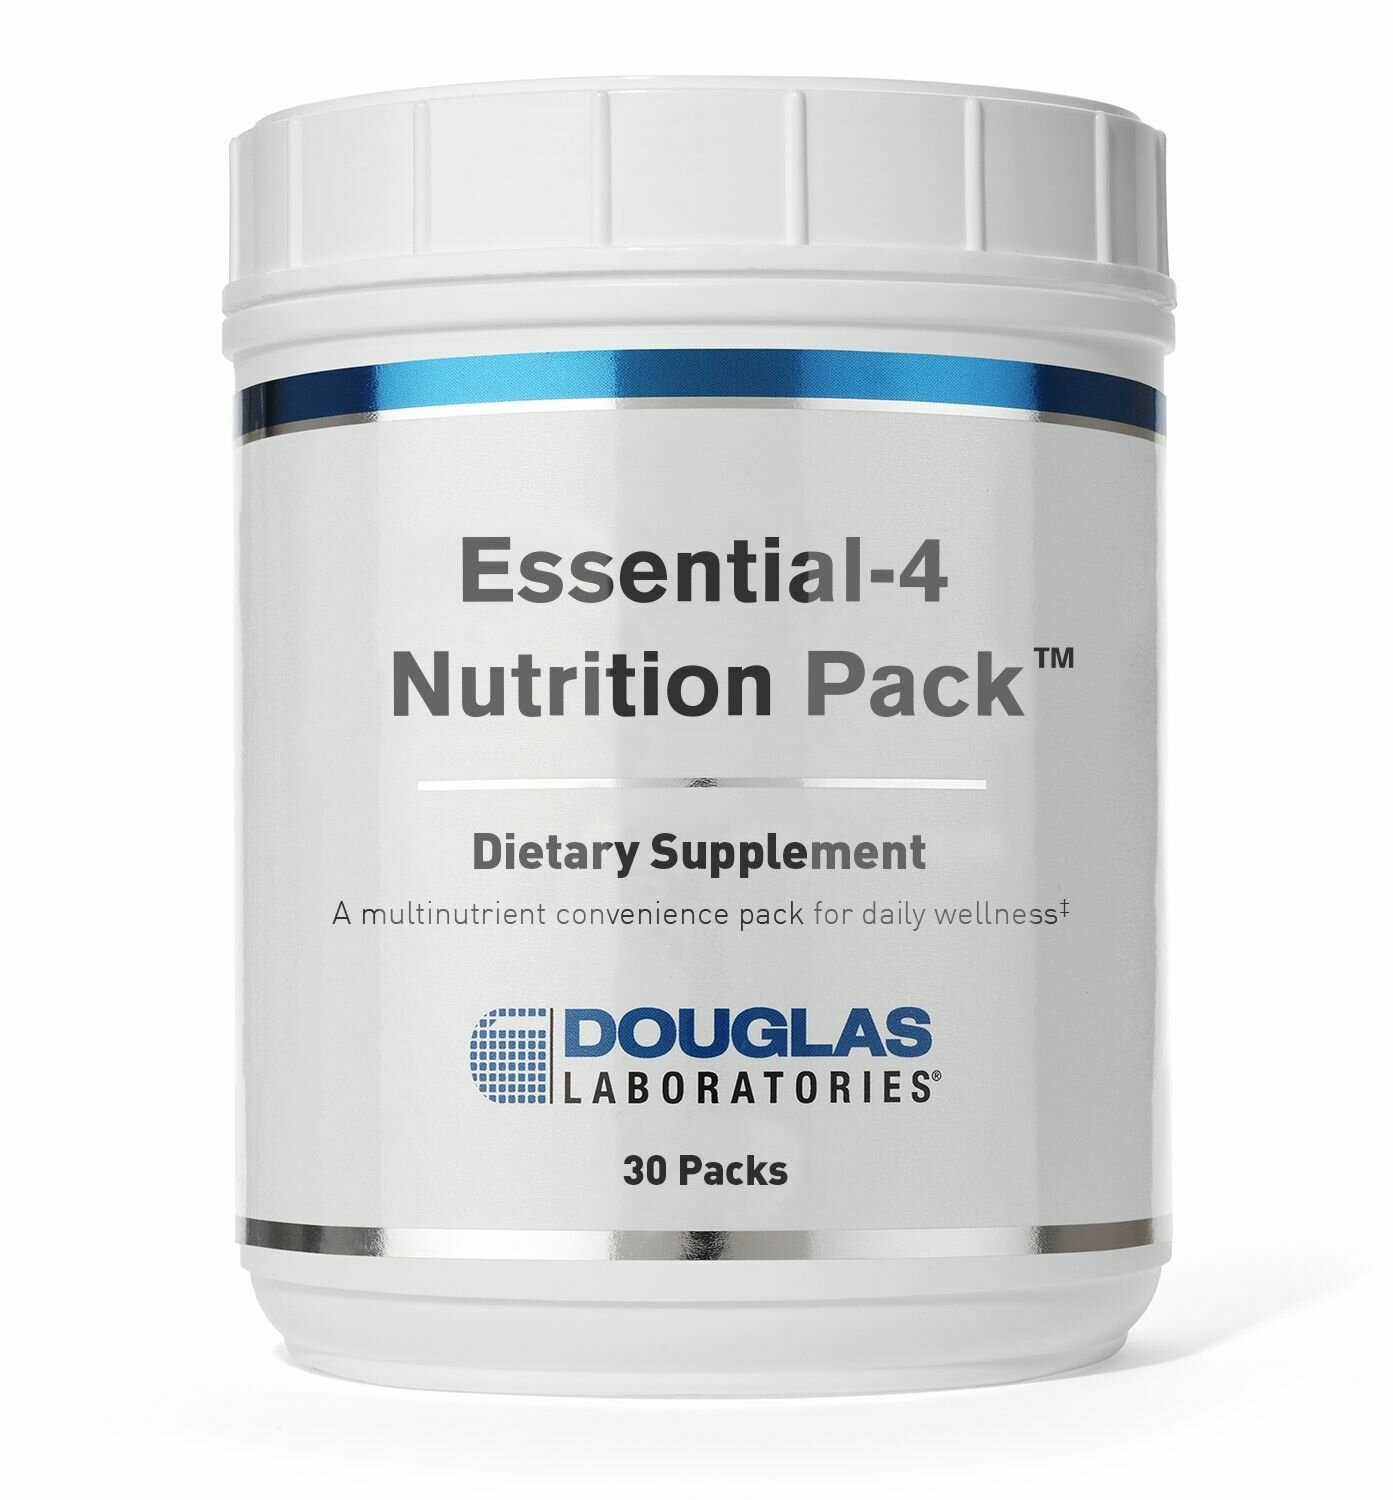 Essential-4 Nutrition Pack